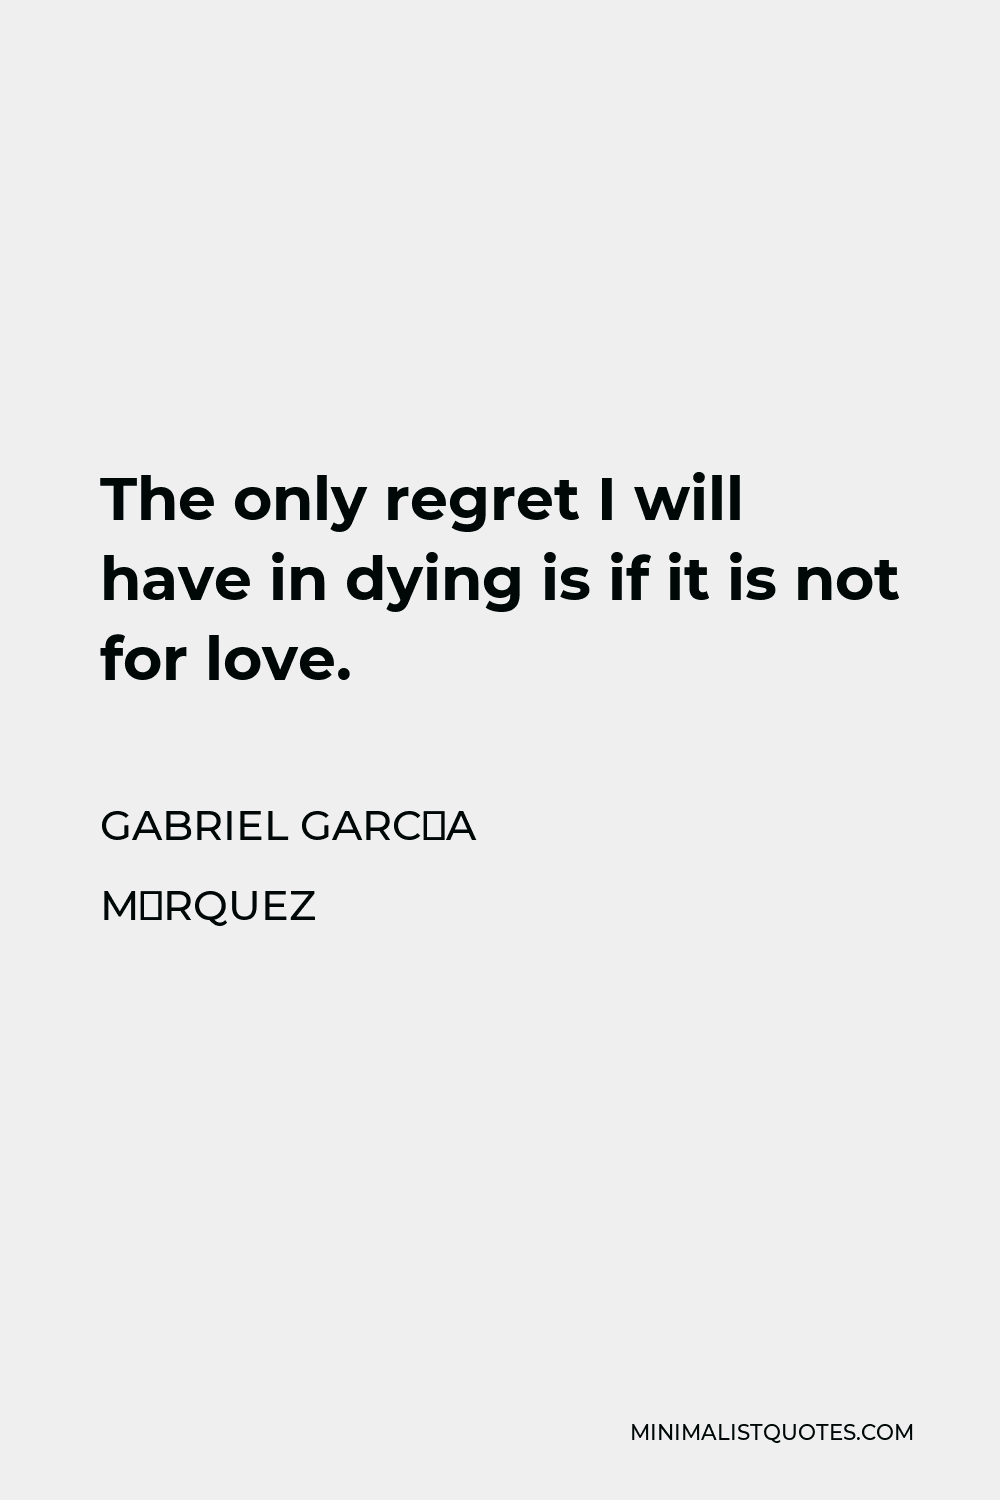 Gabriel García Márquez Quote - The only regret I will have in dying is if it is not for love.